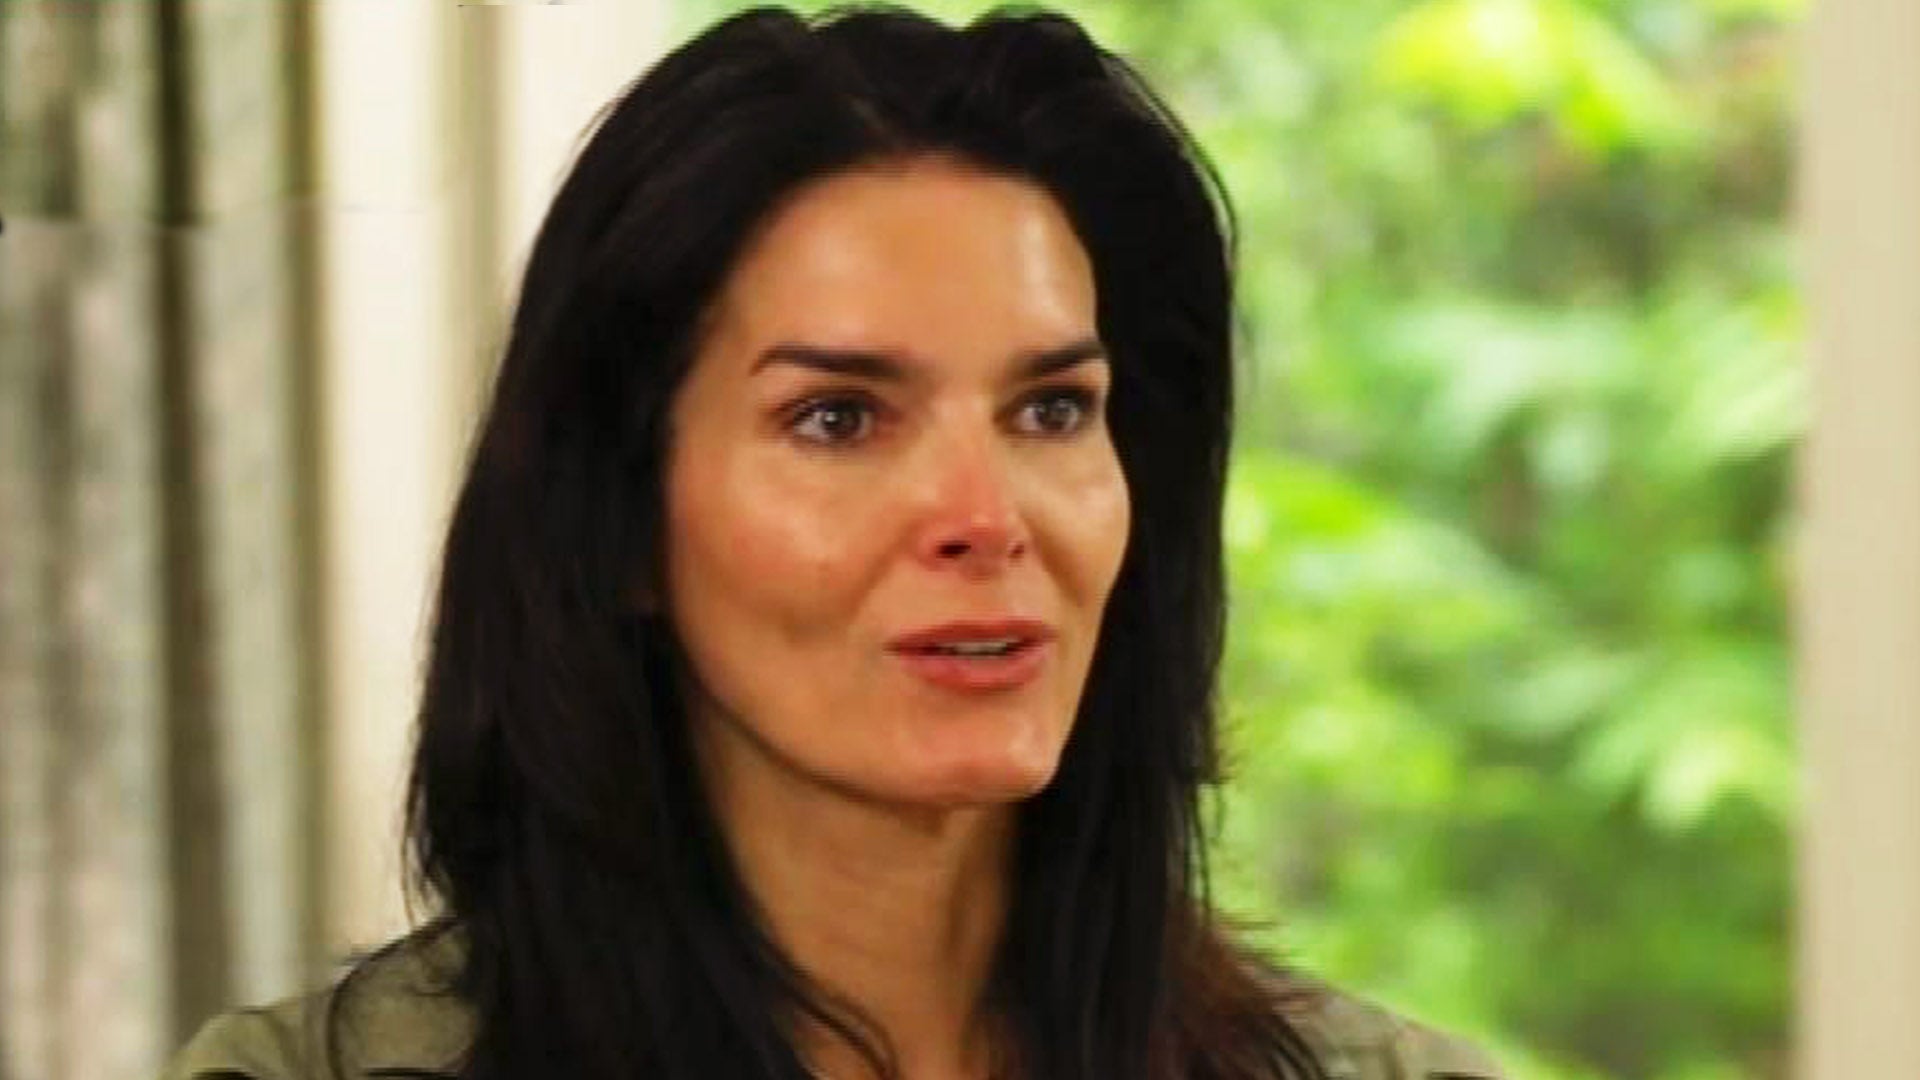 Angie Harmon Files Lawsuit Against Instacart After Shopper Killed Her Dog